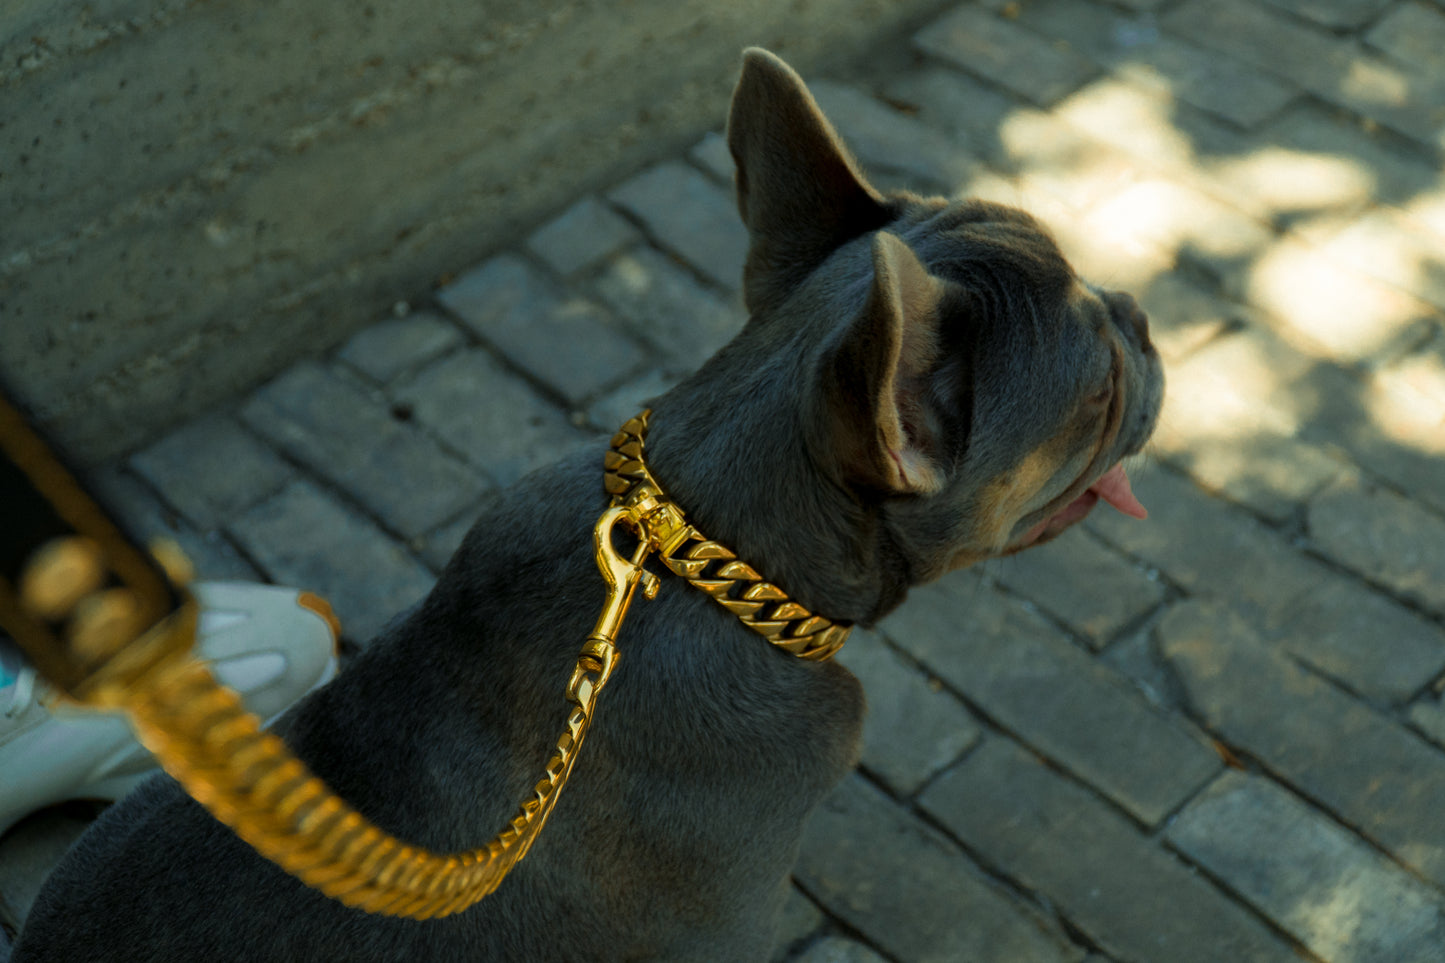 The Hermes |  Small Gold Cuban Link Collar